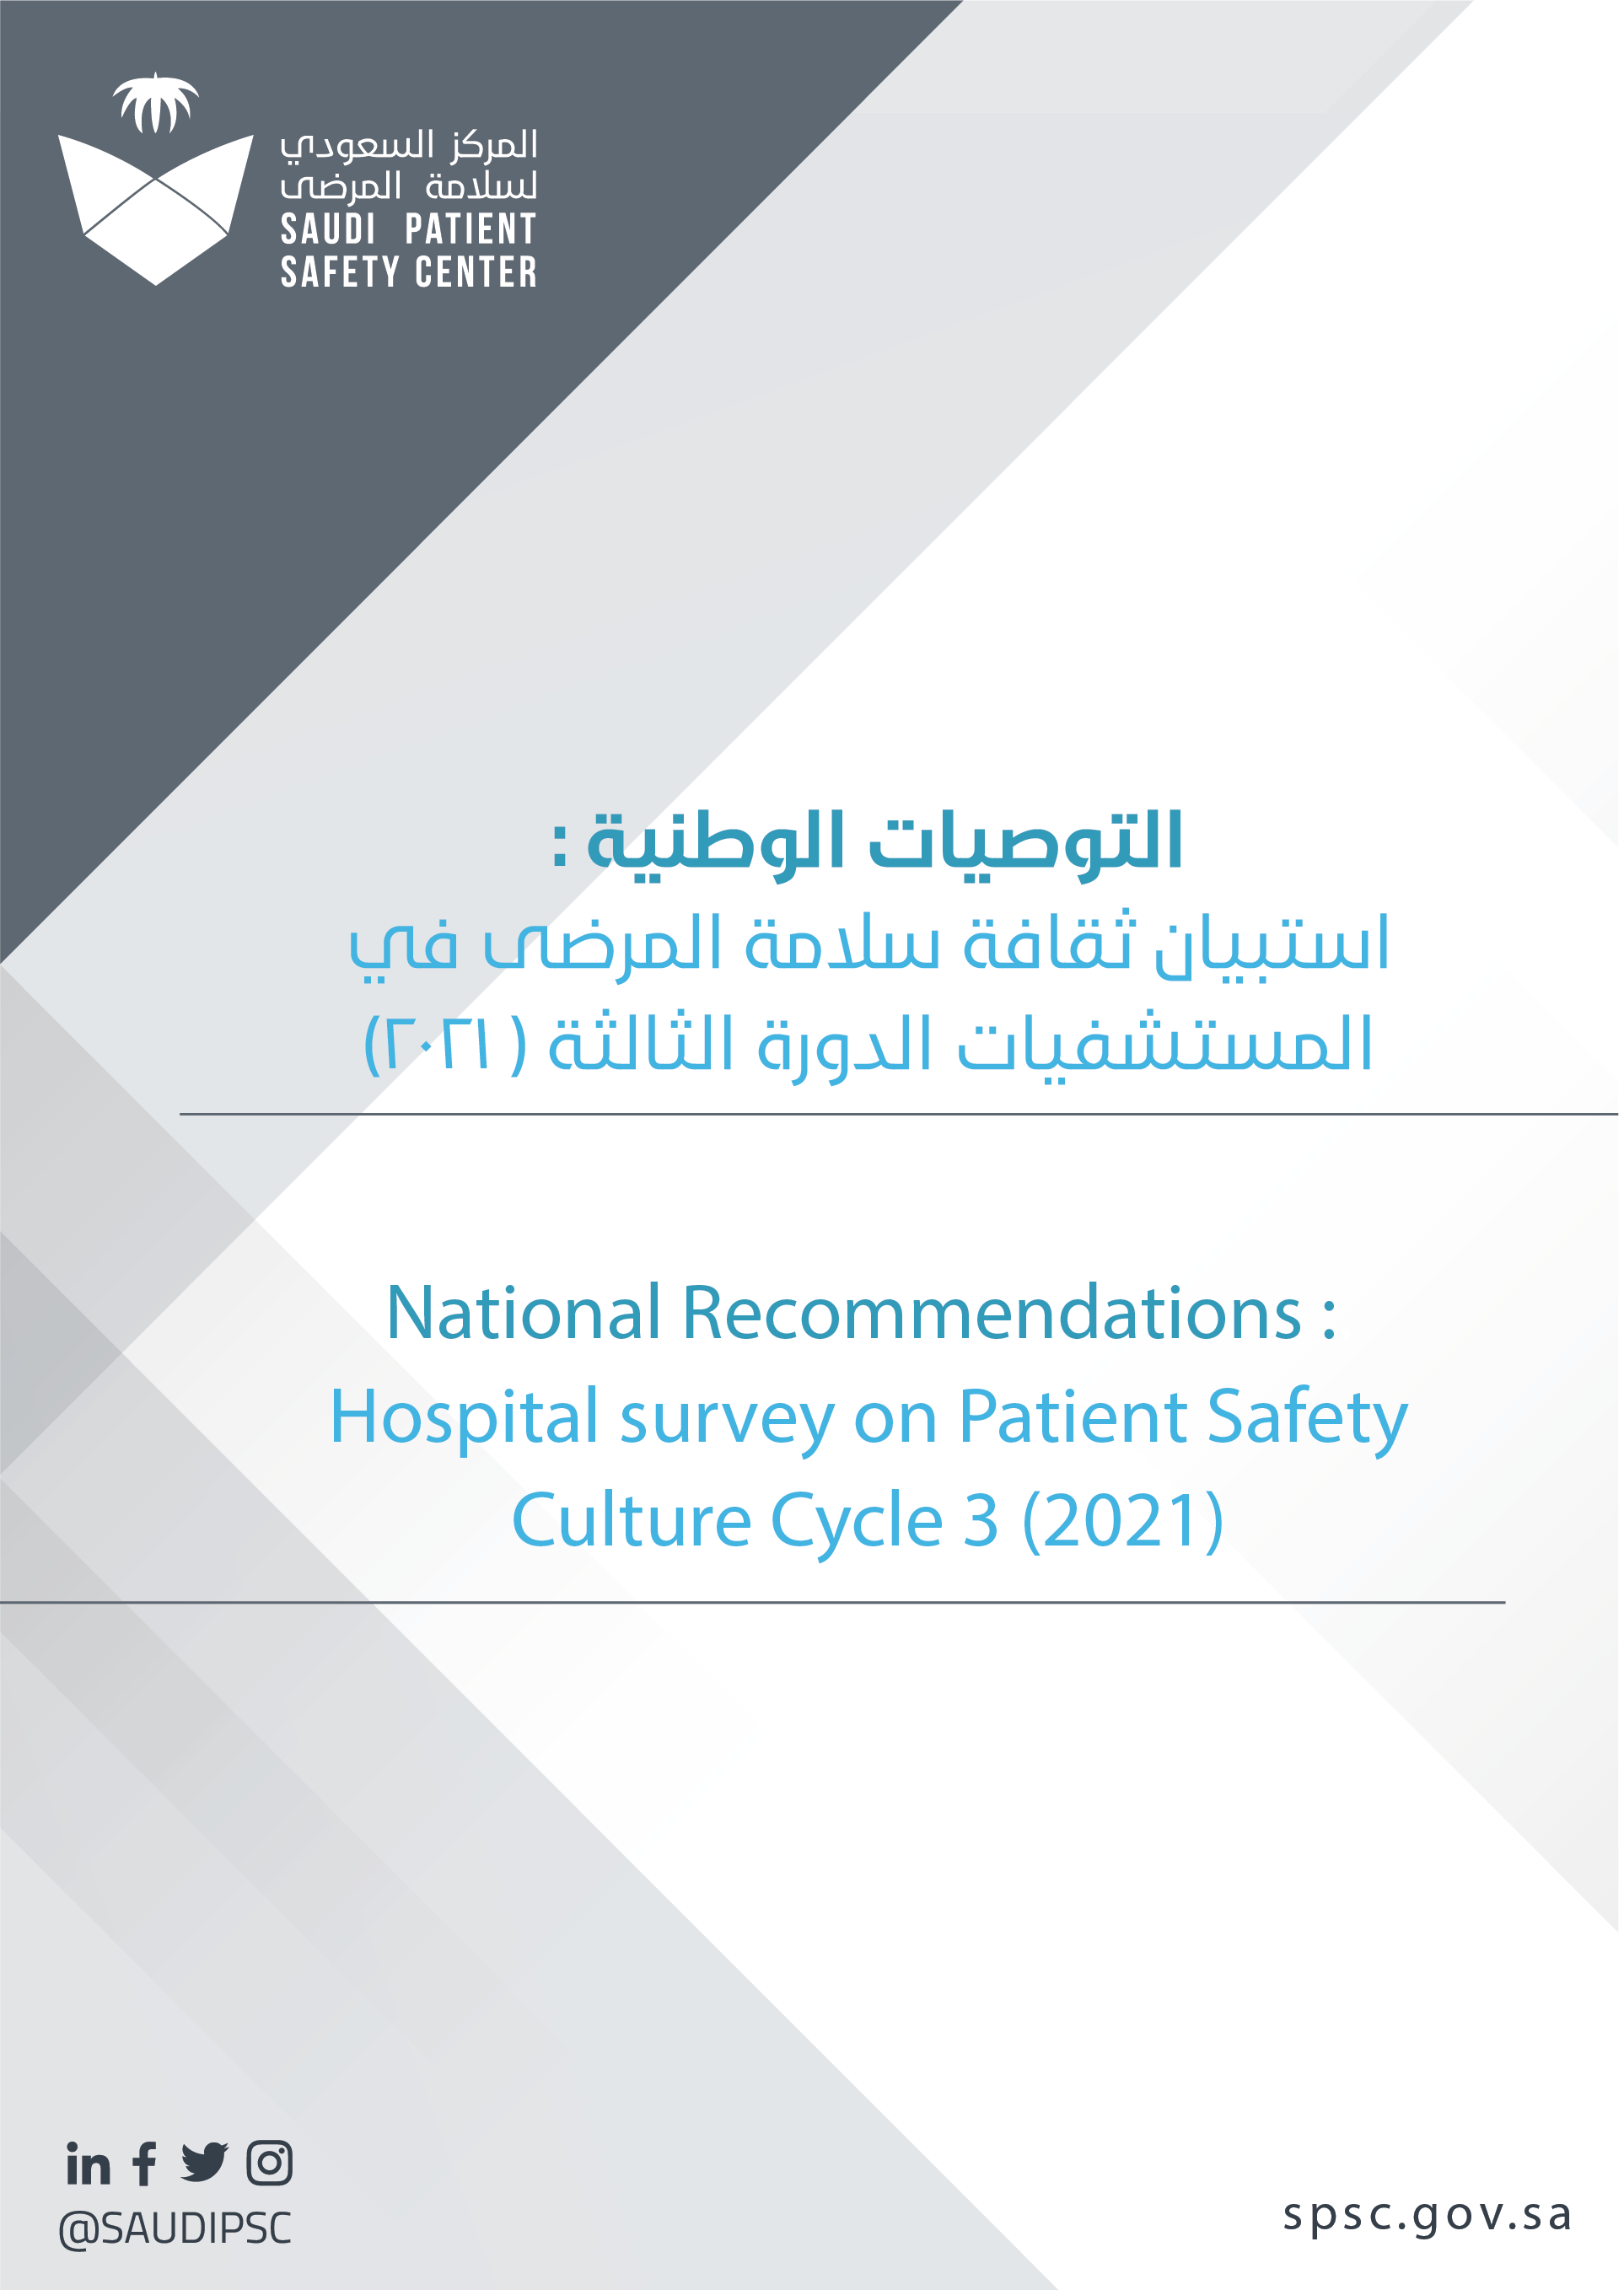 National Recommendations for Hospital Survey on Patient Safety Culture Cycle 3 (2021)